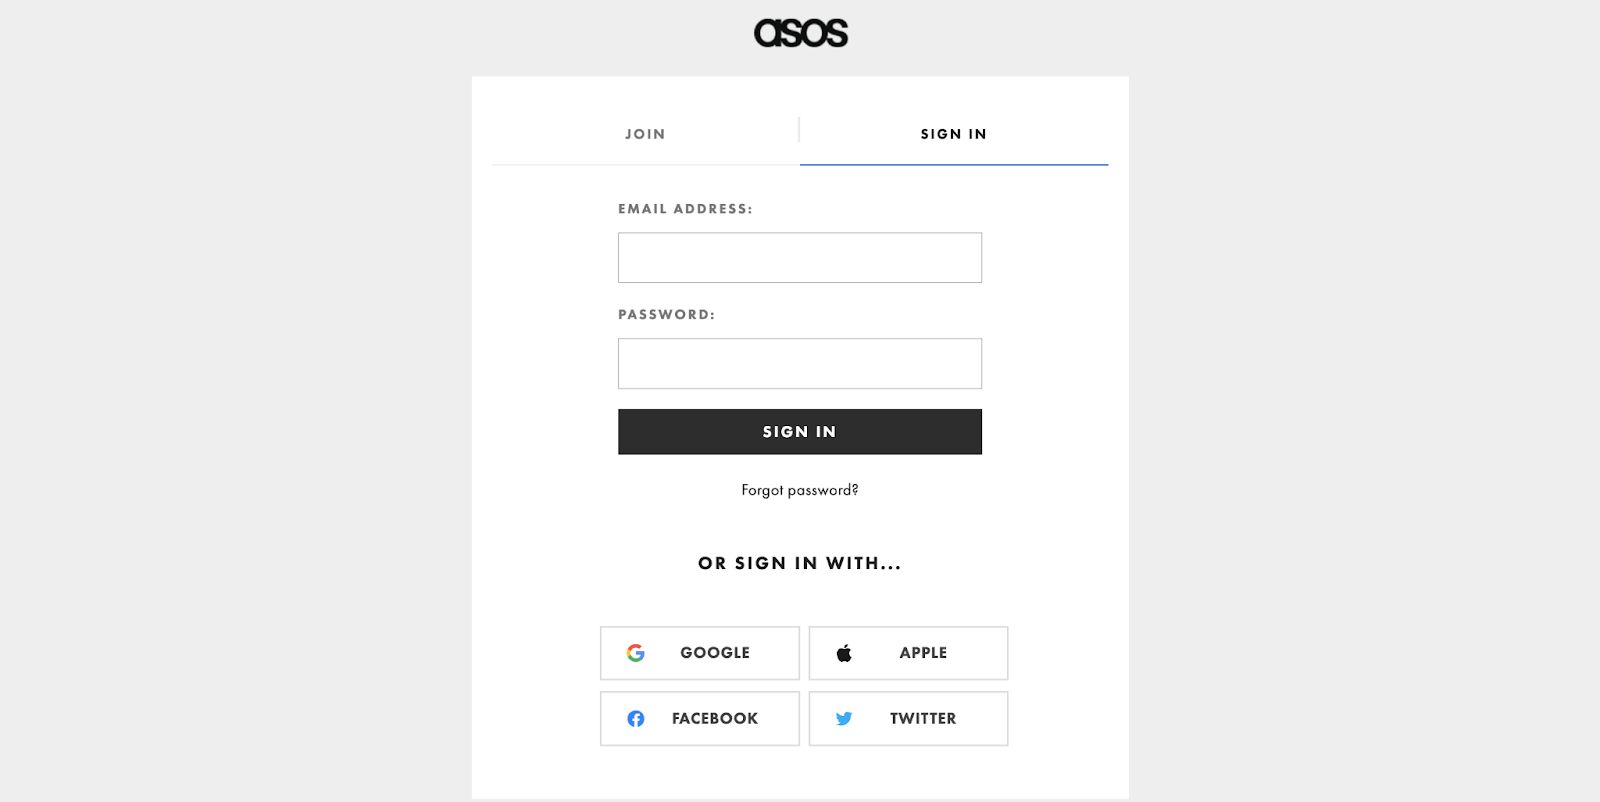 Improve the checkout process by offering a social sign-in option.